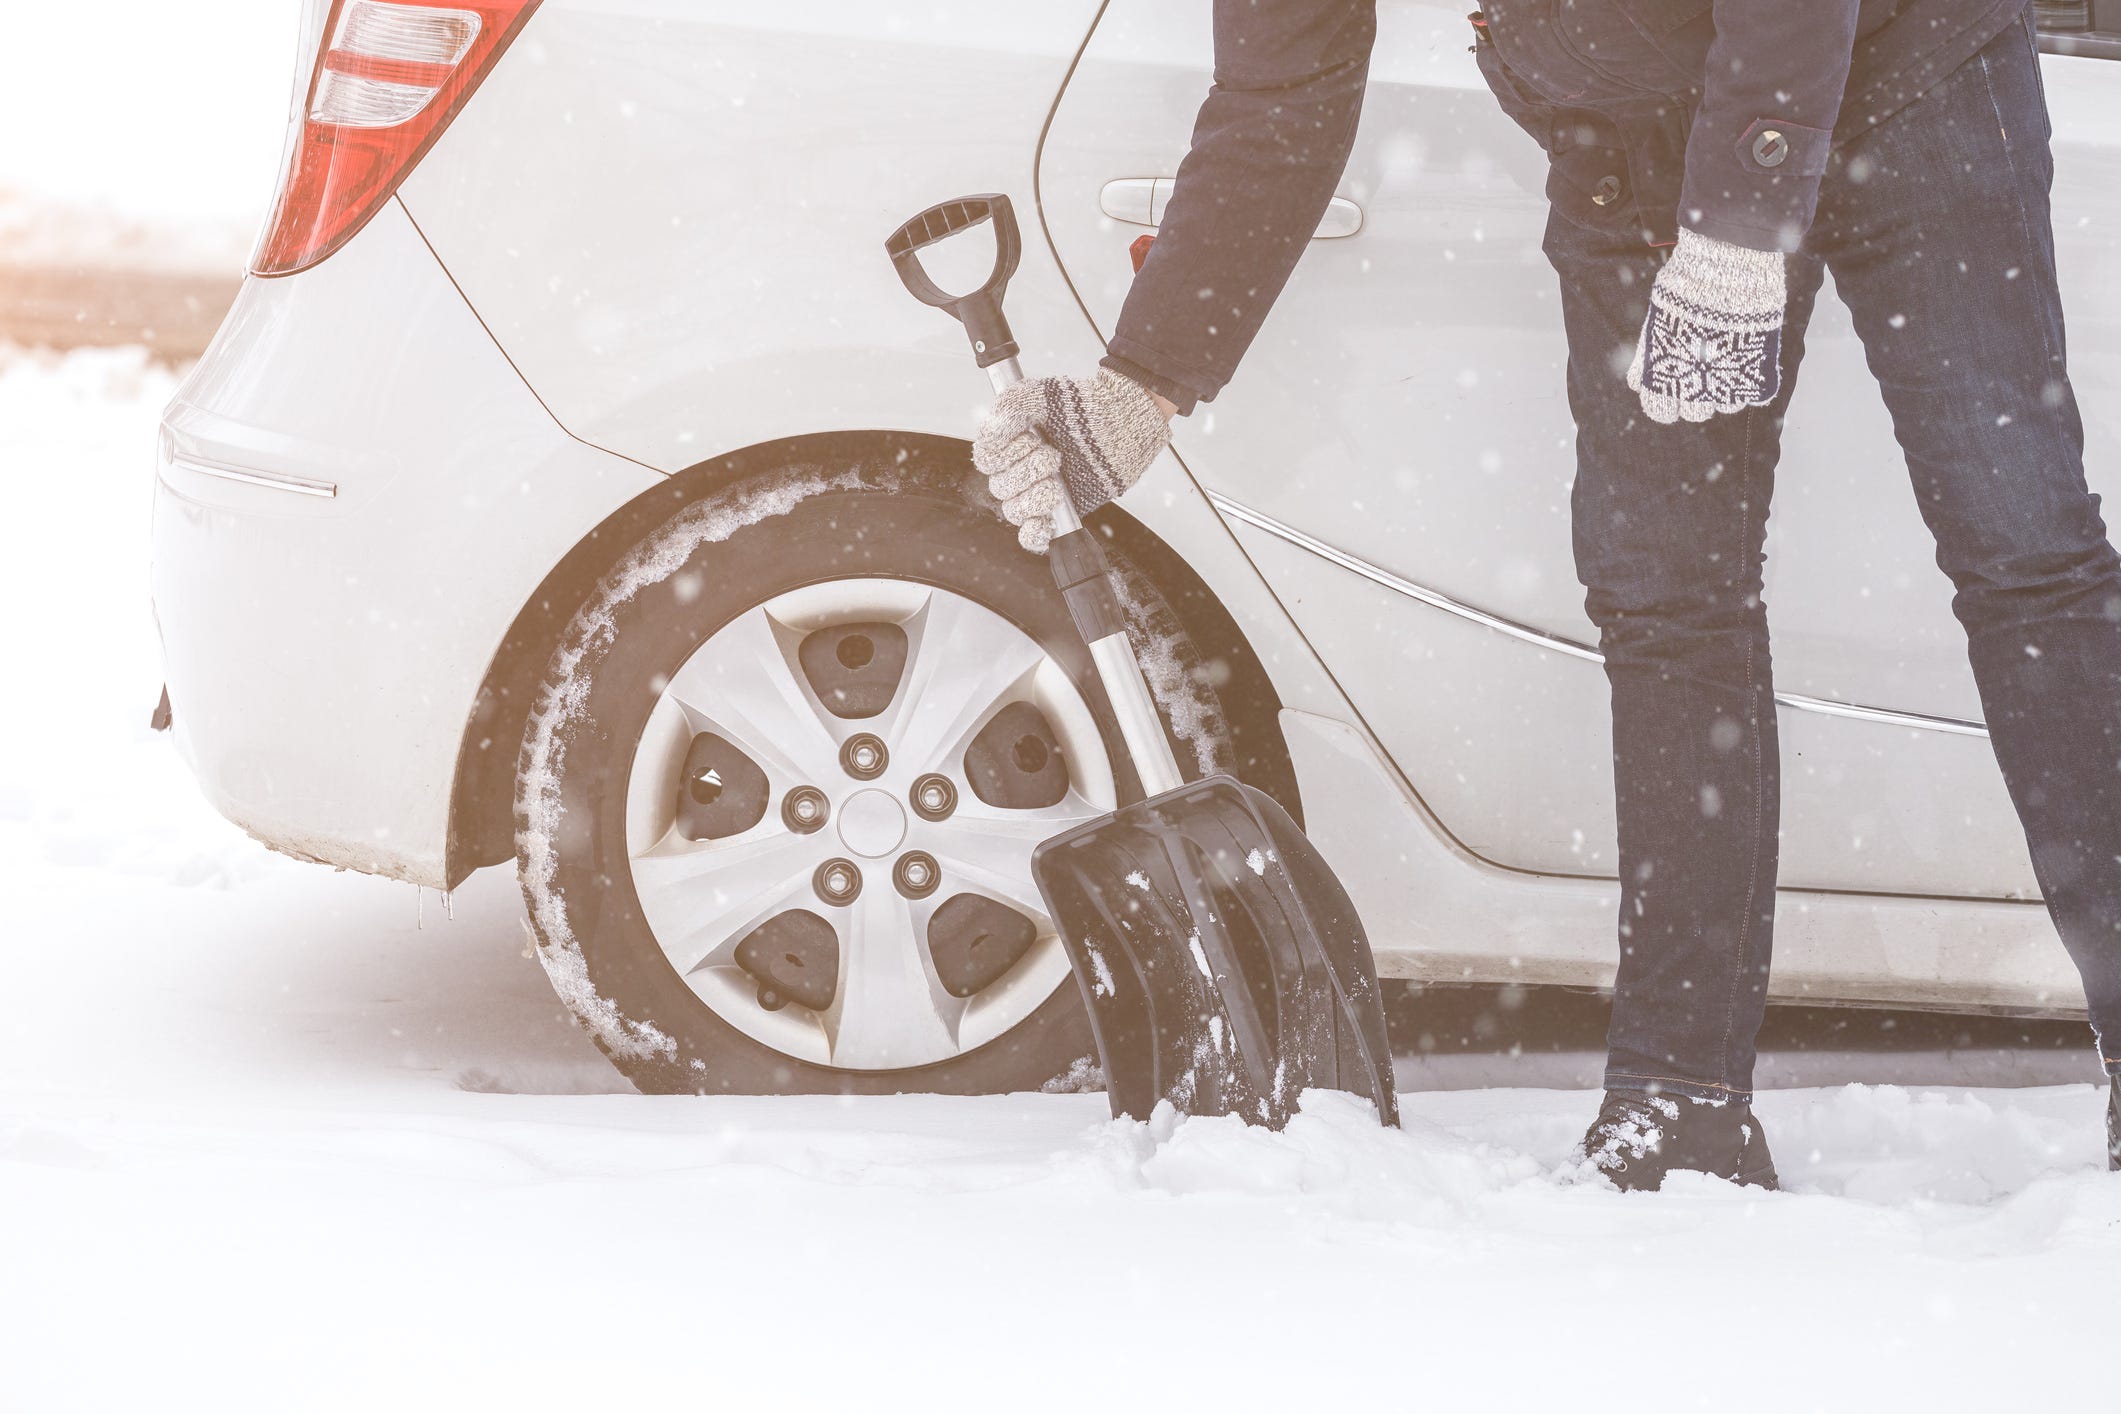 Unexpected cold snap or snow? You can use these common household items to remove snow and ice